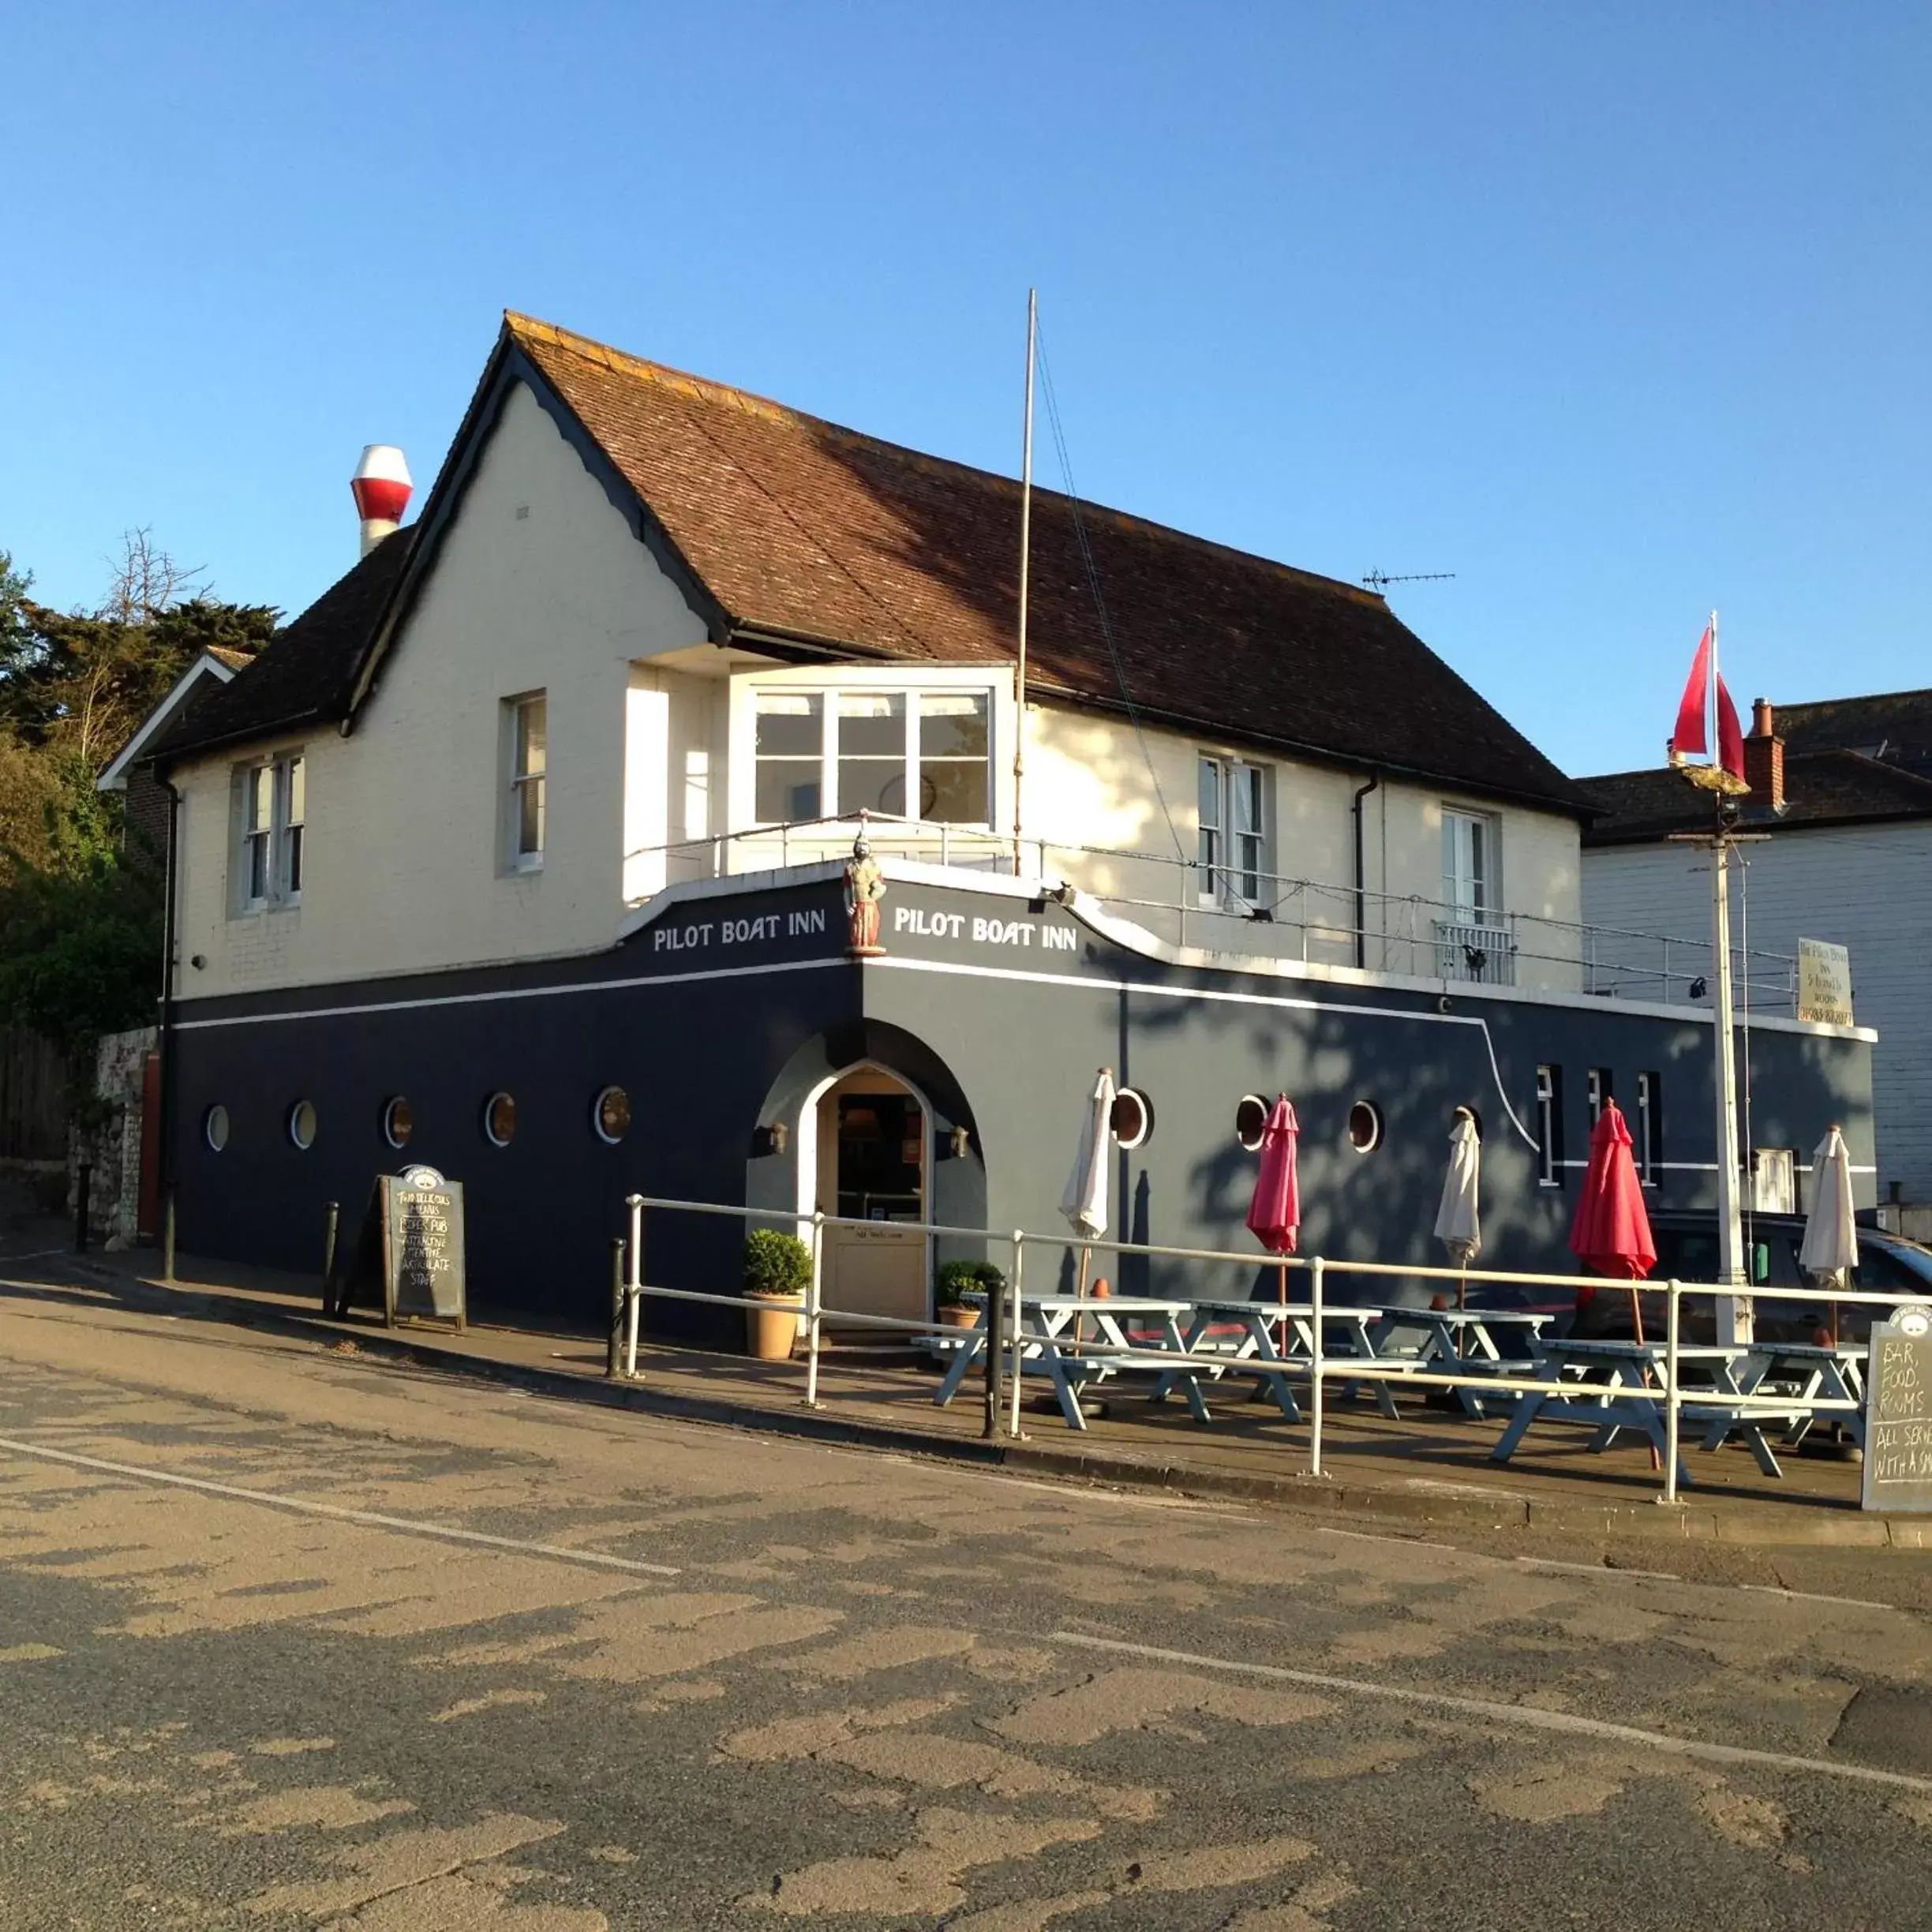 Property Building in The Pilot Boat Inn, Isle of Wight